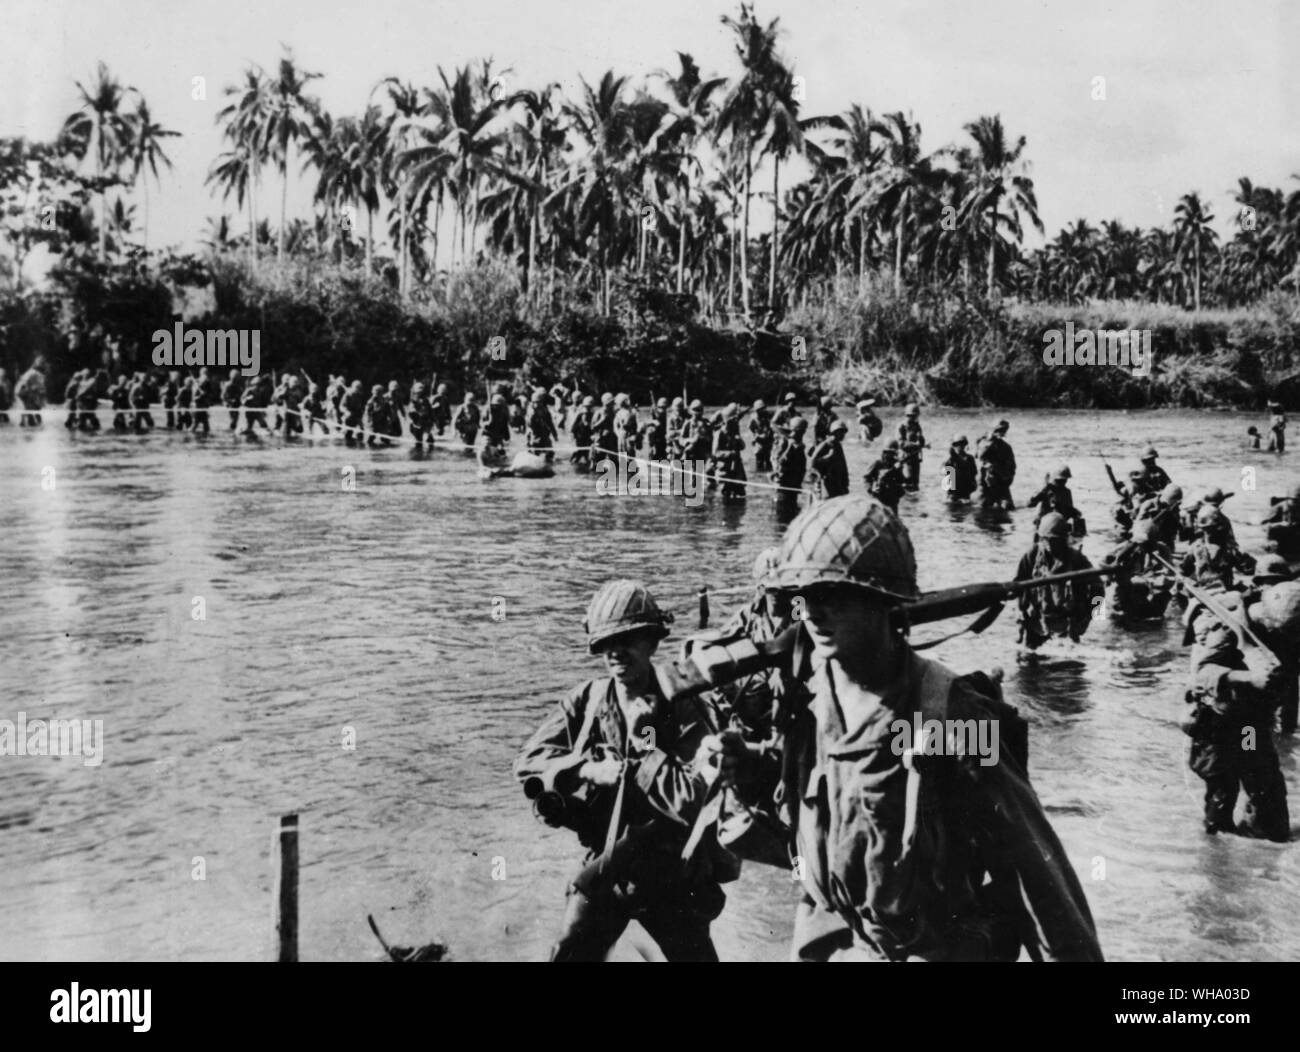 US troops on Leyte Island. Using a rope as a guide from shore to shore, soldiers of the US 7th Division file across the shallow water of the Marahang River, Leyte Island as they advance towards Japanese positions in the hills near Santa Ana. Despite treacherous rivers, the American and Phillipino forces were making slow but steady progress against the reinforced enemy units in the area. Stock Photo